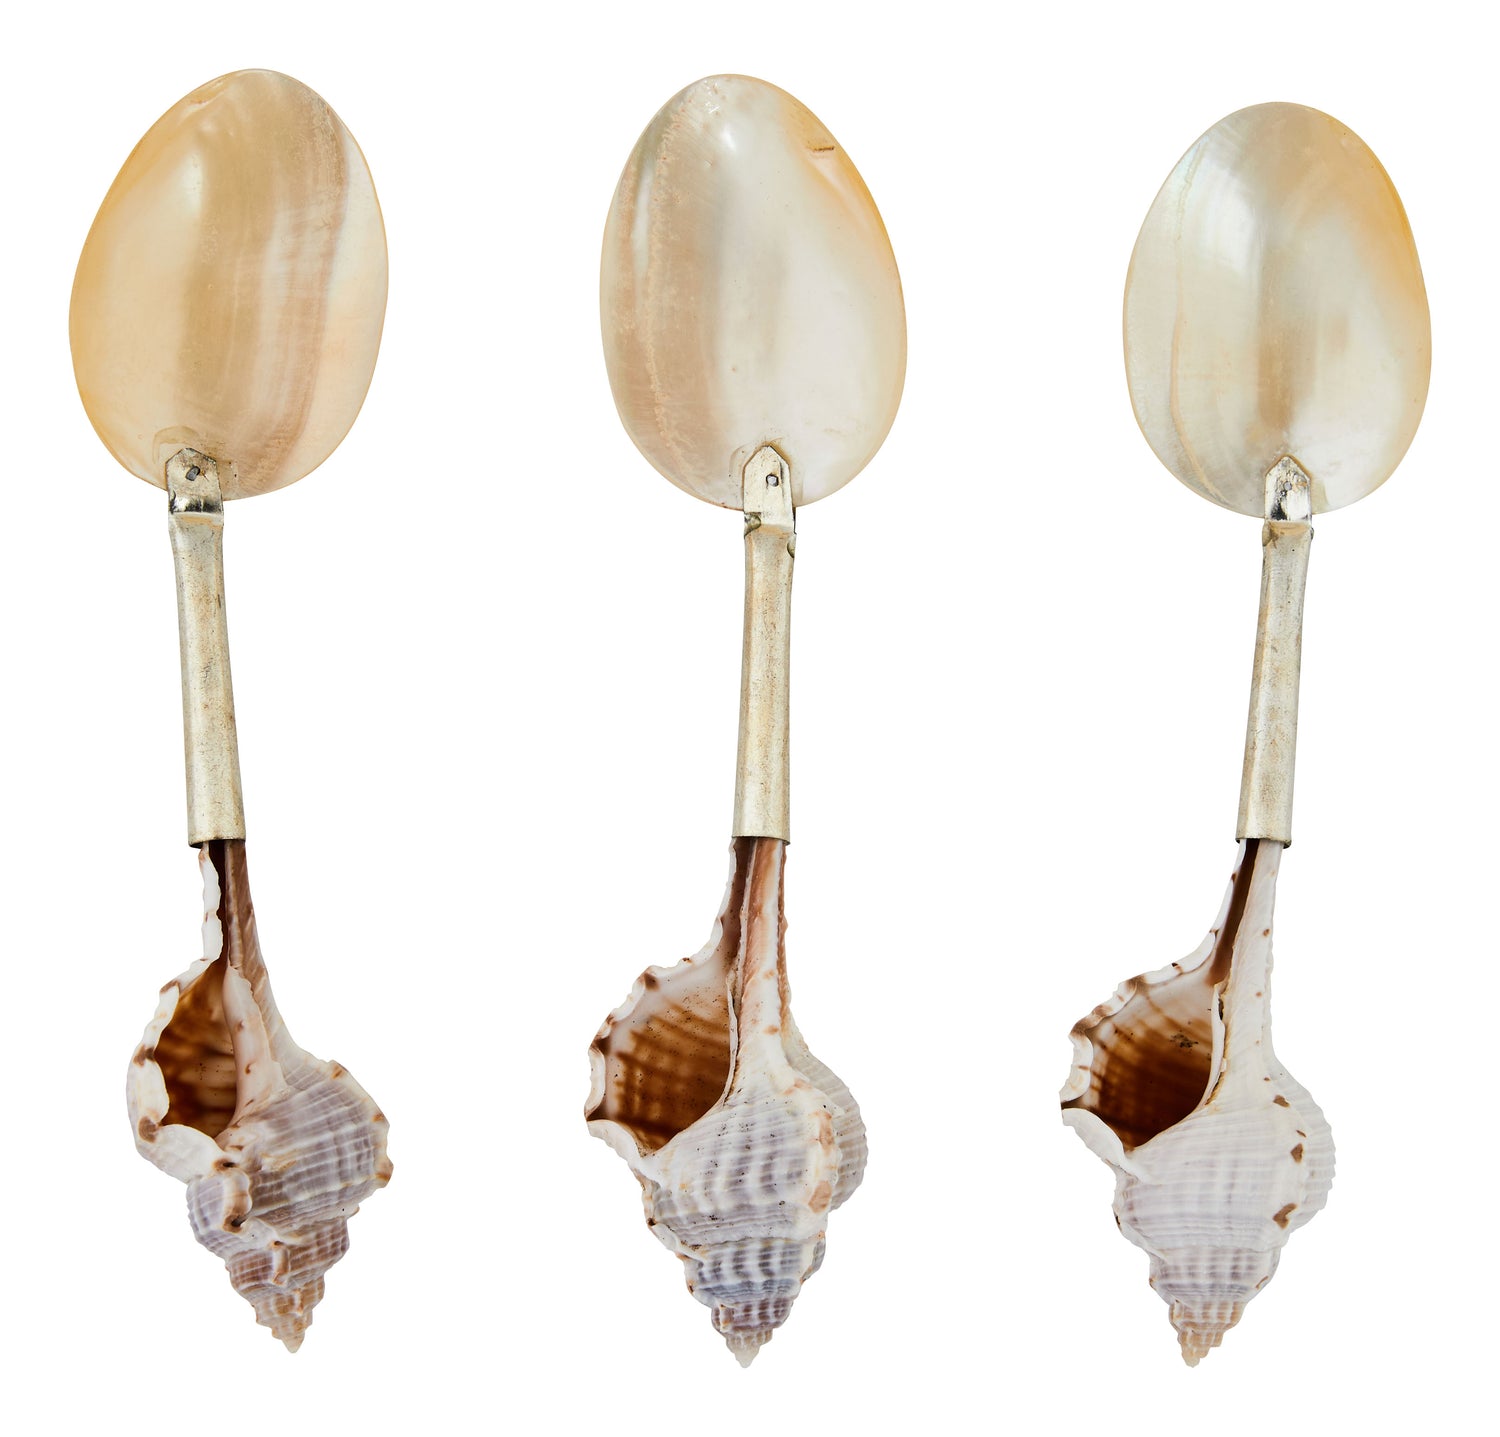 HIC Maine Man Natural Baking Shells Small 6 Pc. - Spoons N Spice